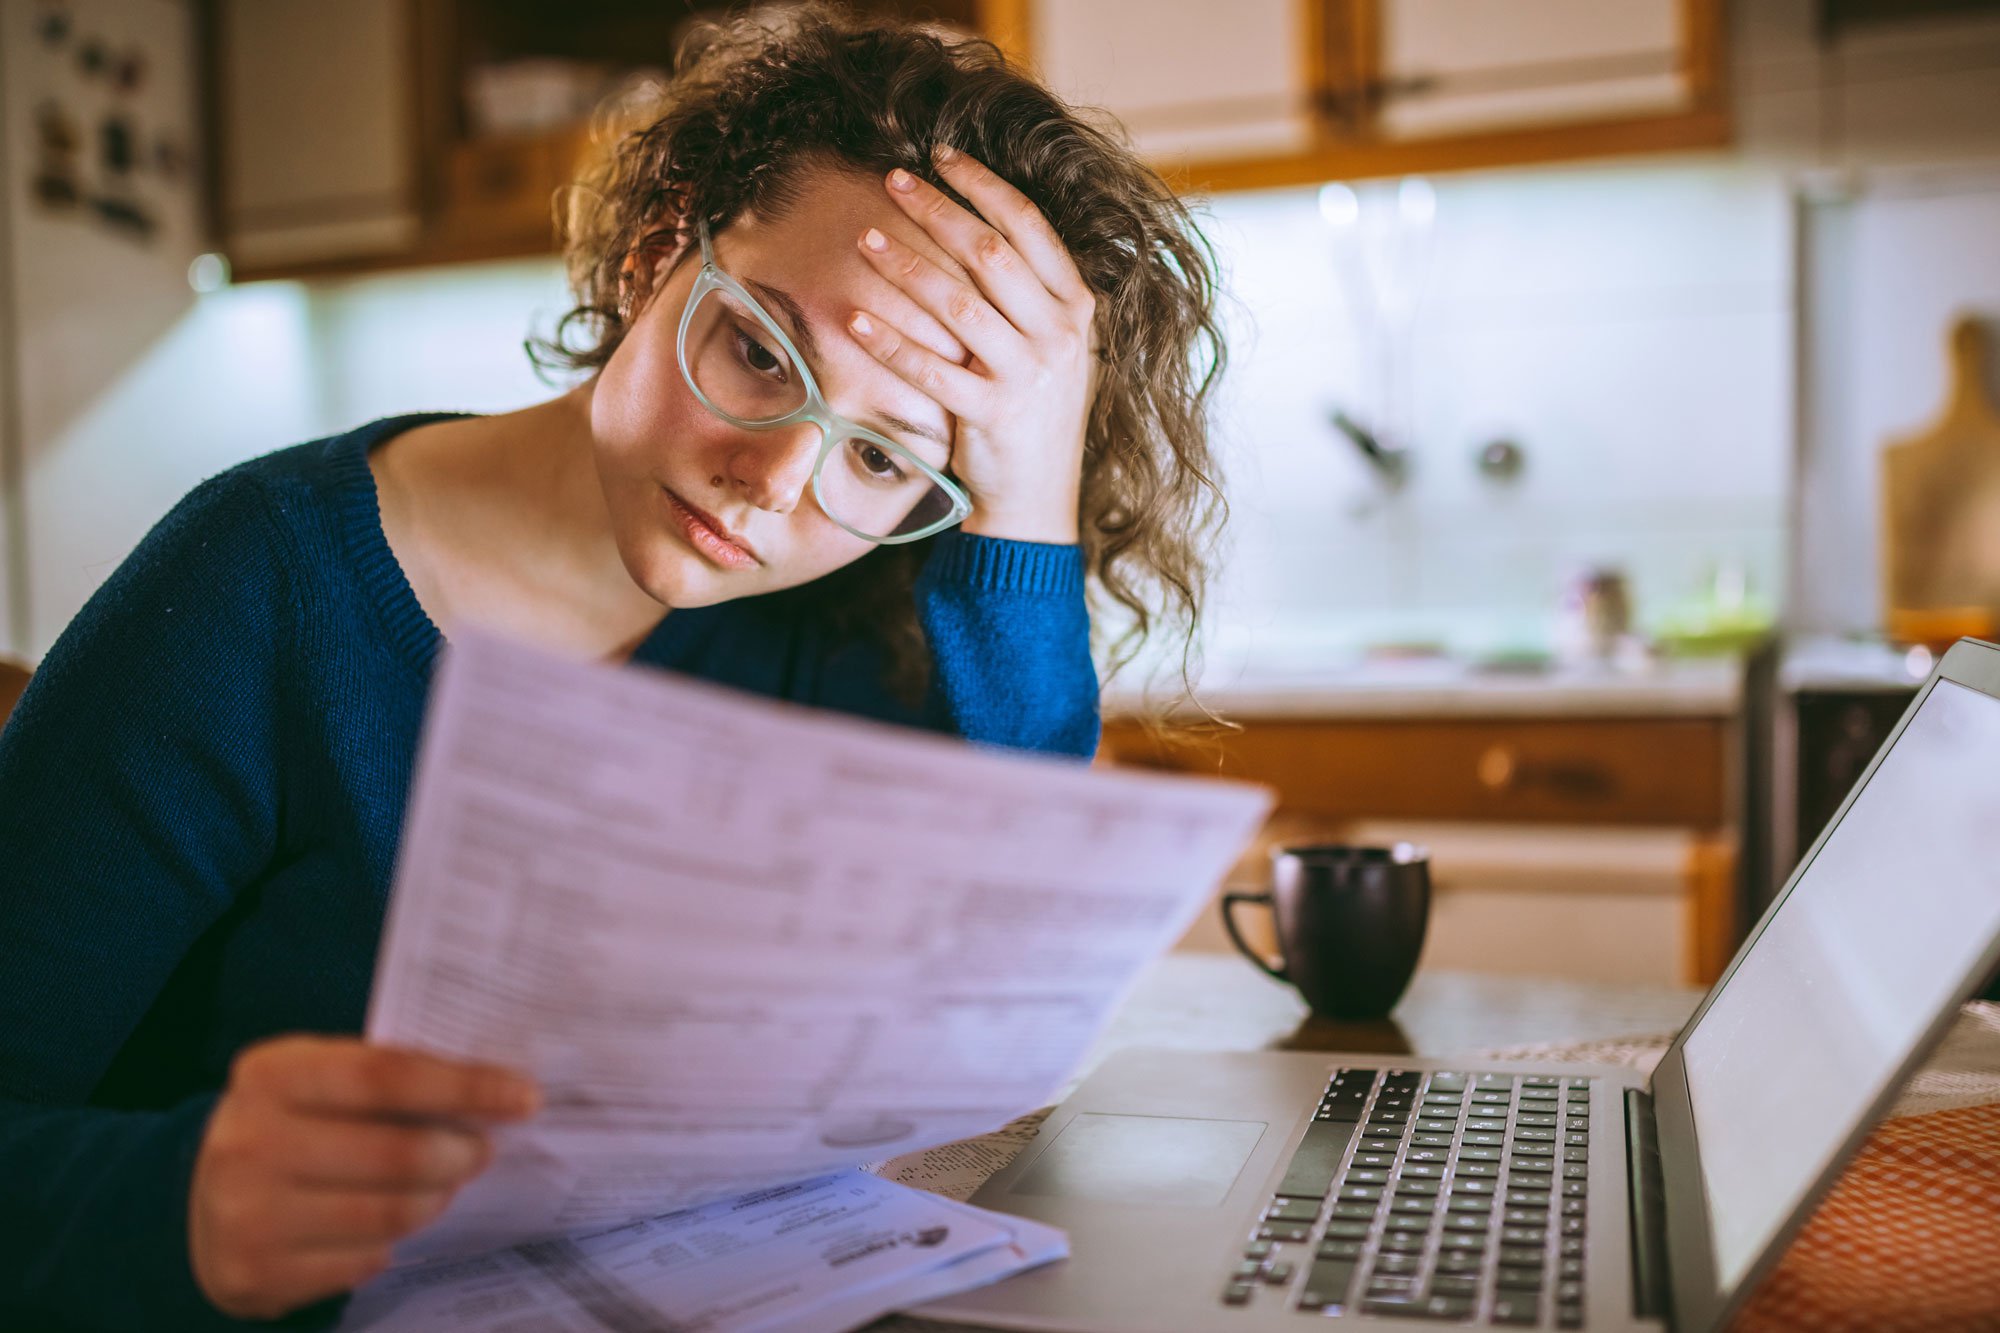 Women looking stressed while reading over bills